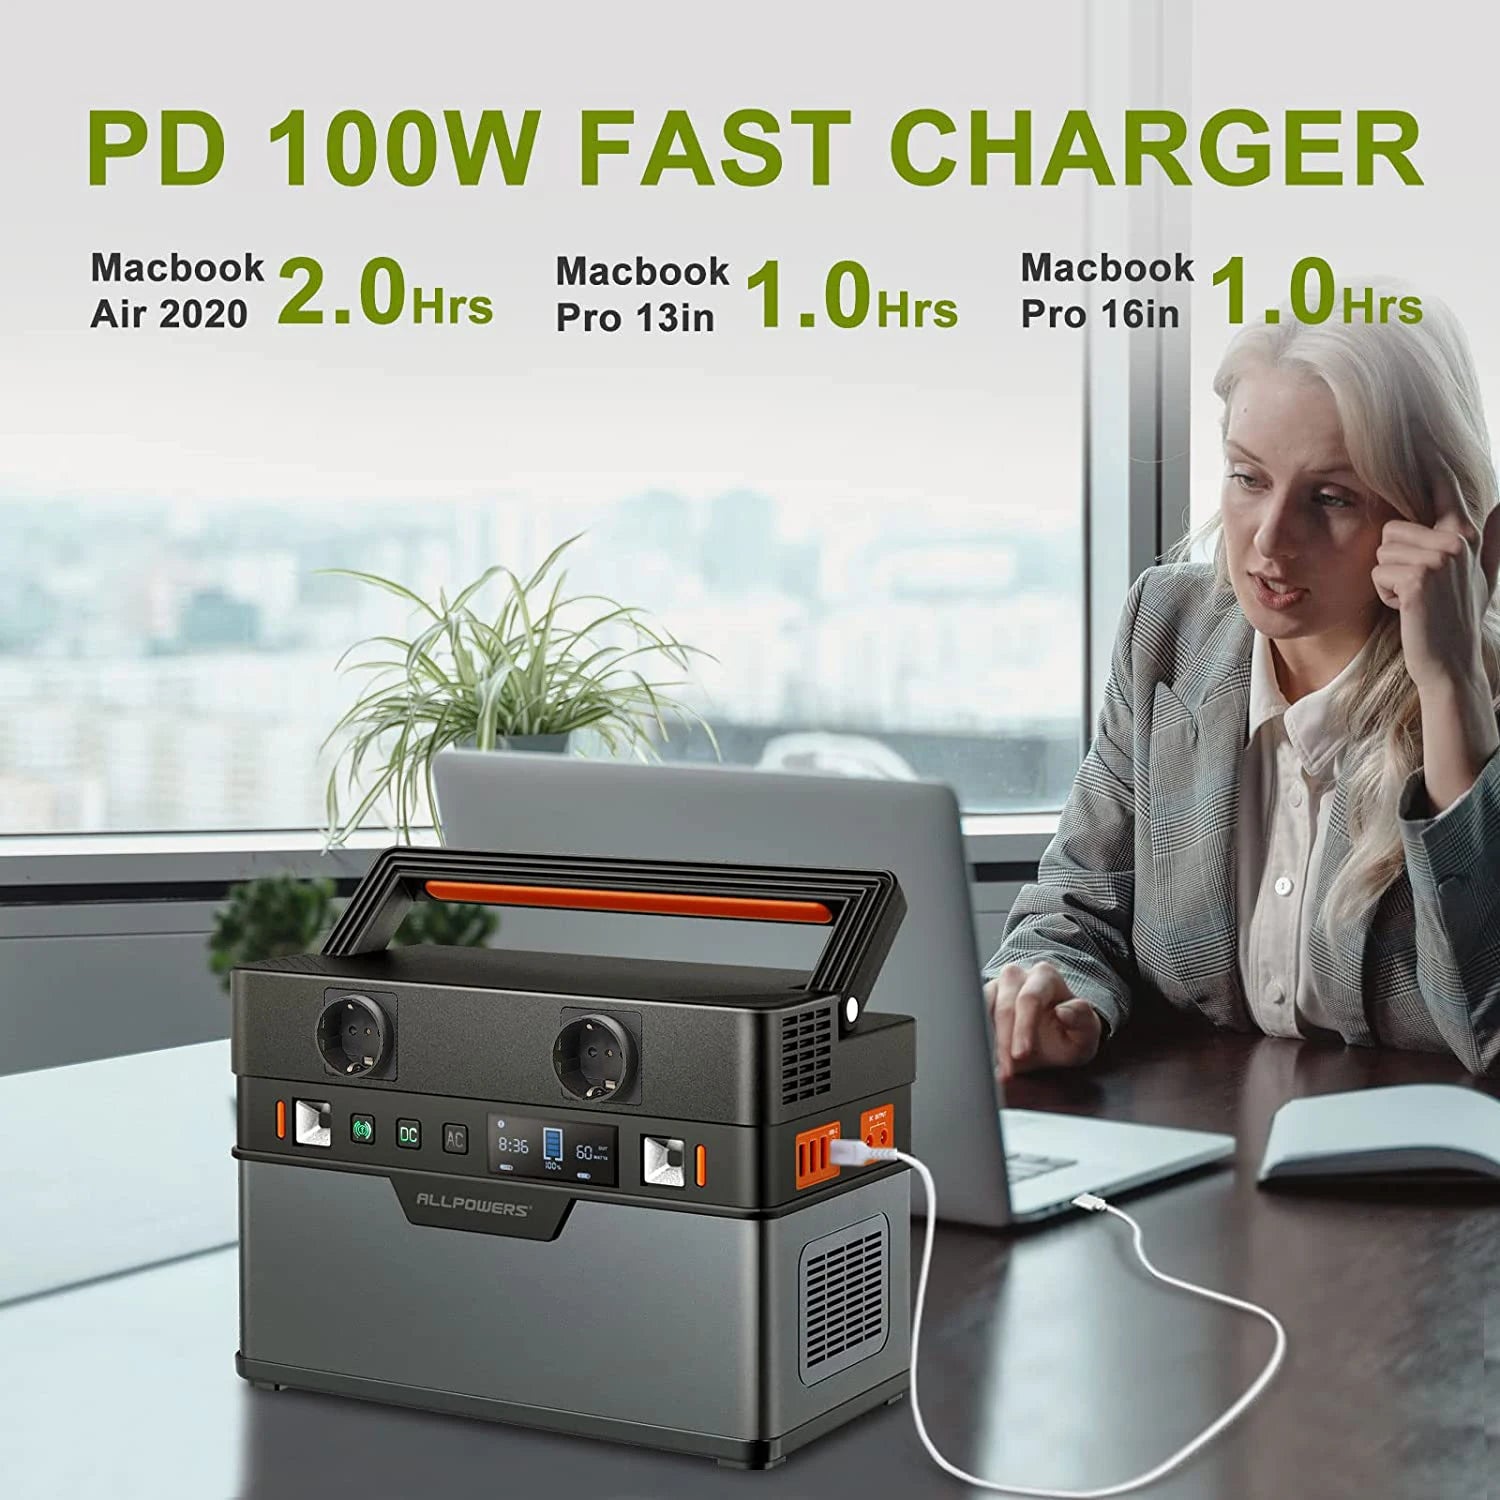 Fast charge for MacBooks (up to 2020 models), Pro 13in and 16in devices: charges in 2 hours.